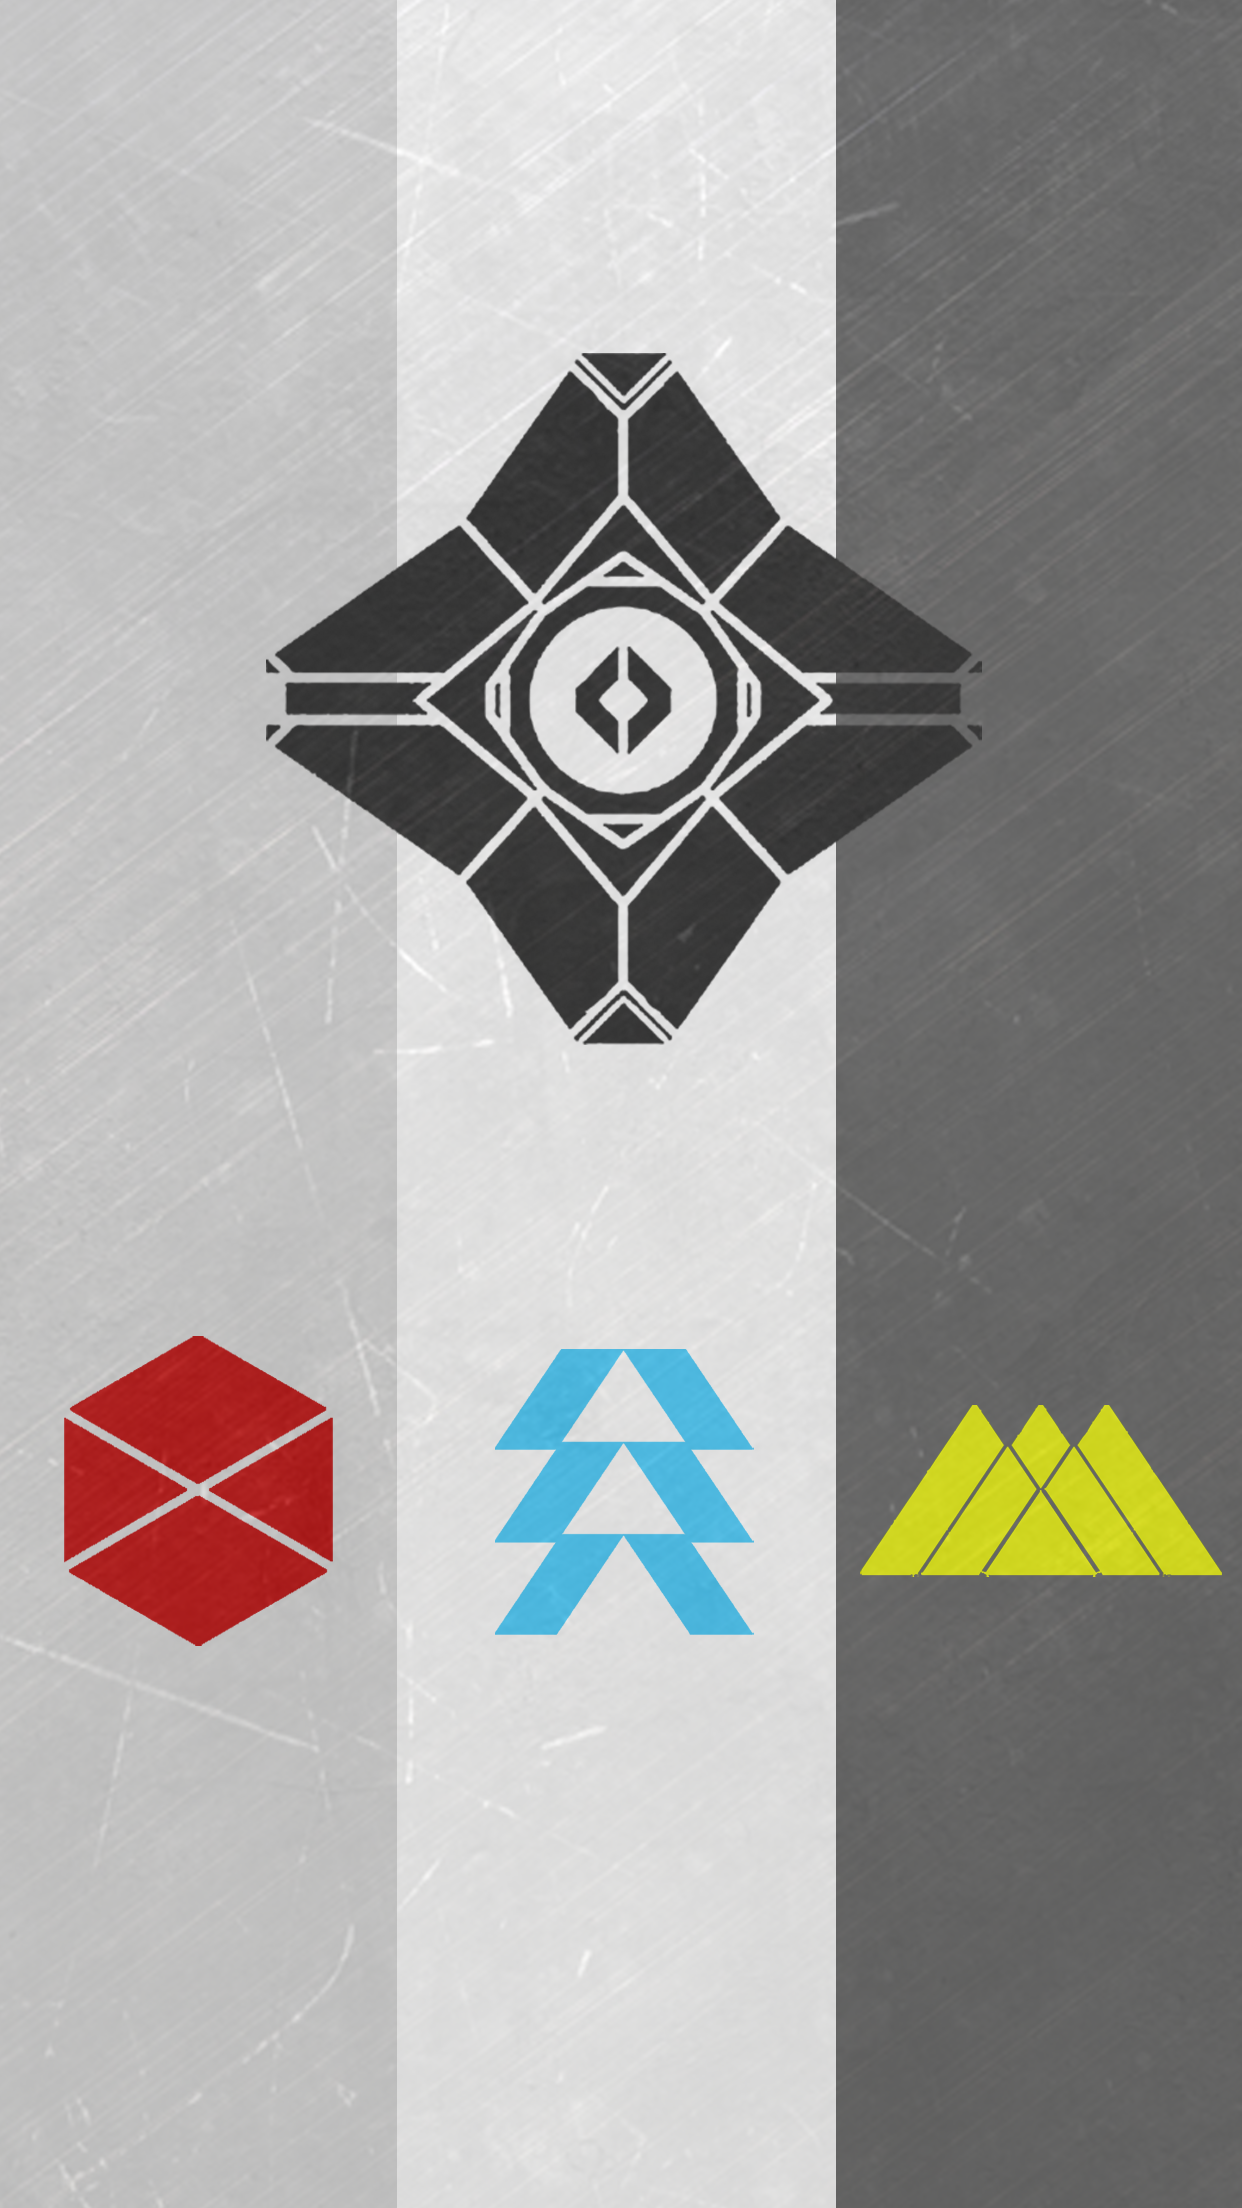 Destiny 2 Titan  Download 4k wallpapers for iPhone and Android